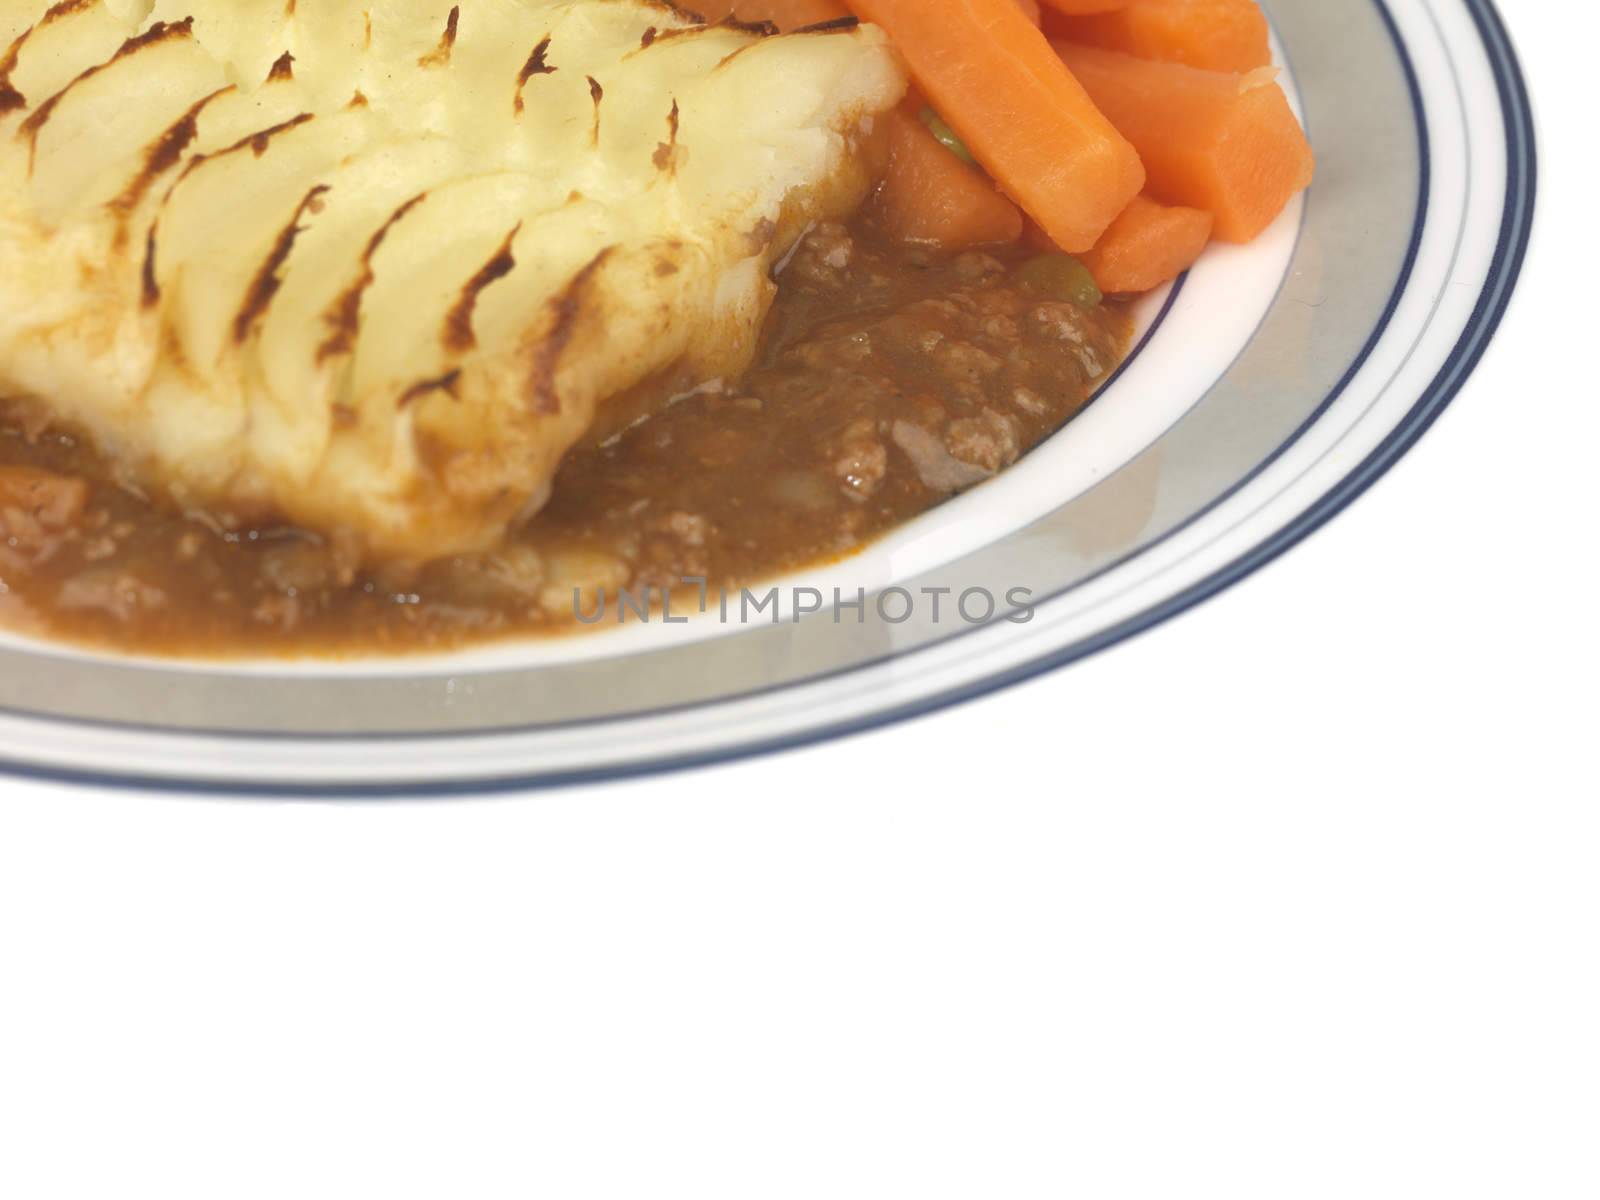 Cottage Pie with Vegetables by Whiteboxmedia